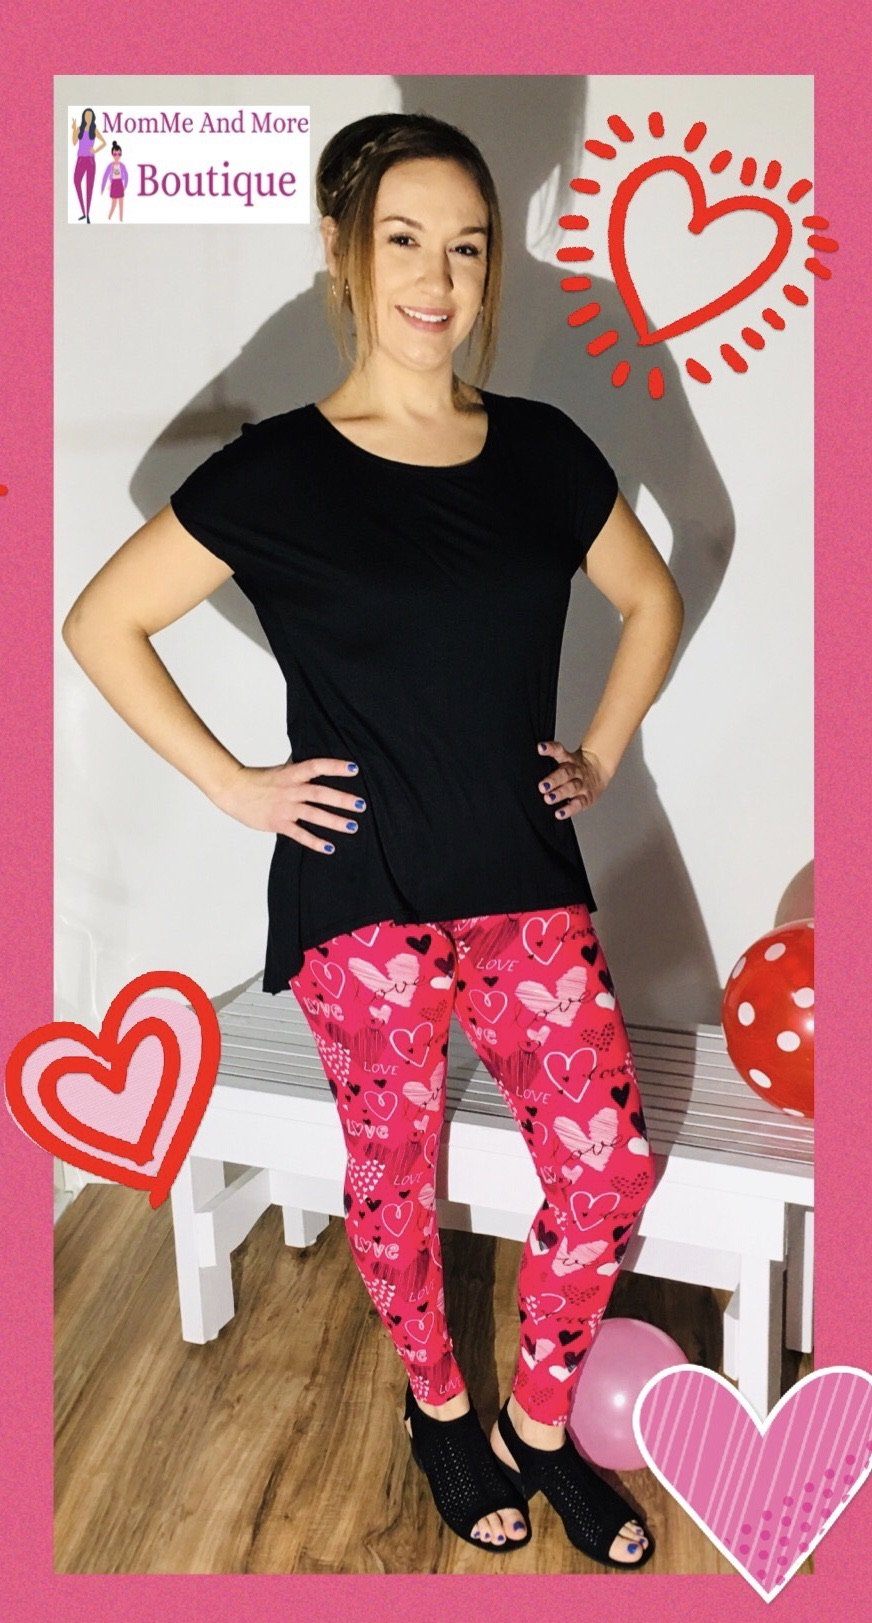 NEW Womens OS/Plus Valentines Day Pink Heart Leggings, Athletic Yoga Pants,  Soft as Lularoe, #mommyandme #valentine #leggings #lularoe #pants